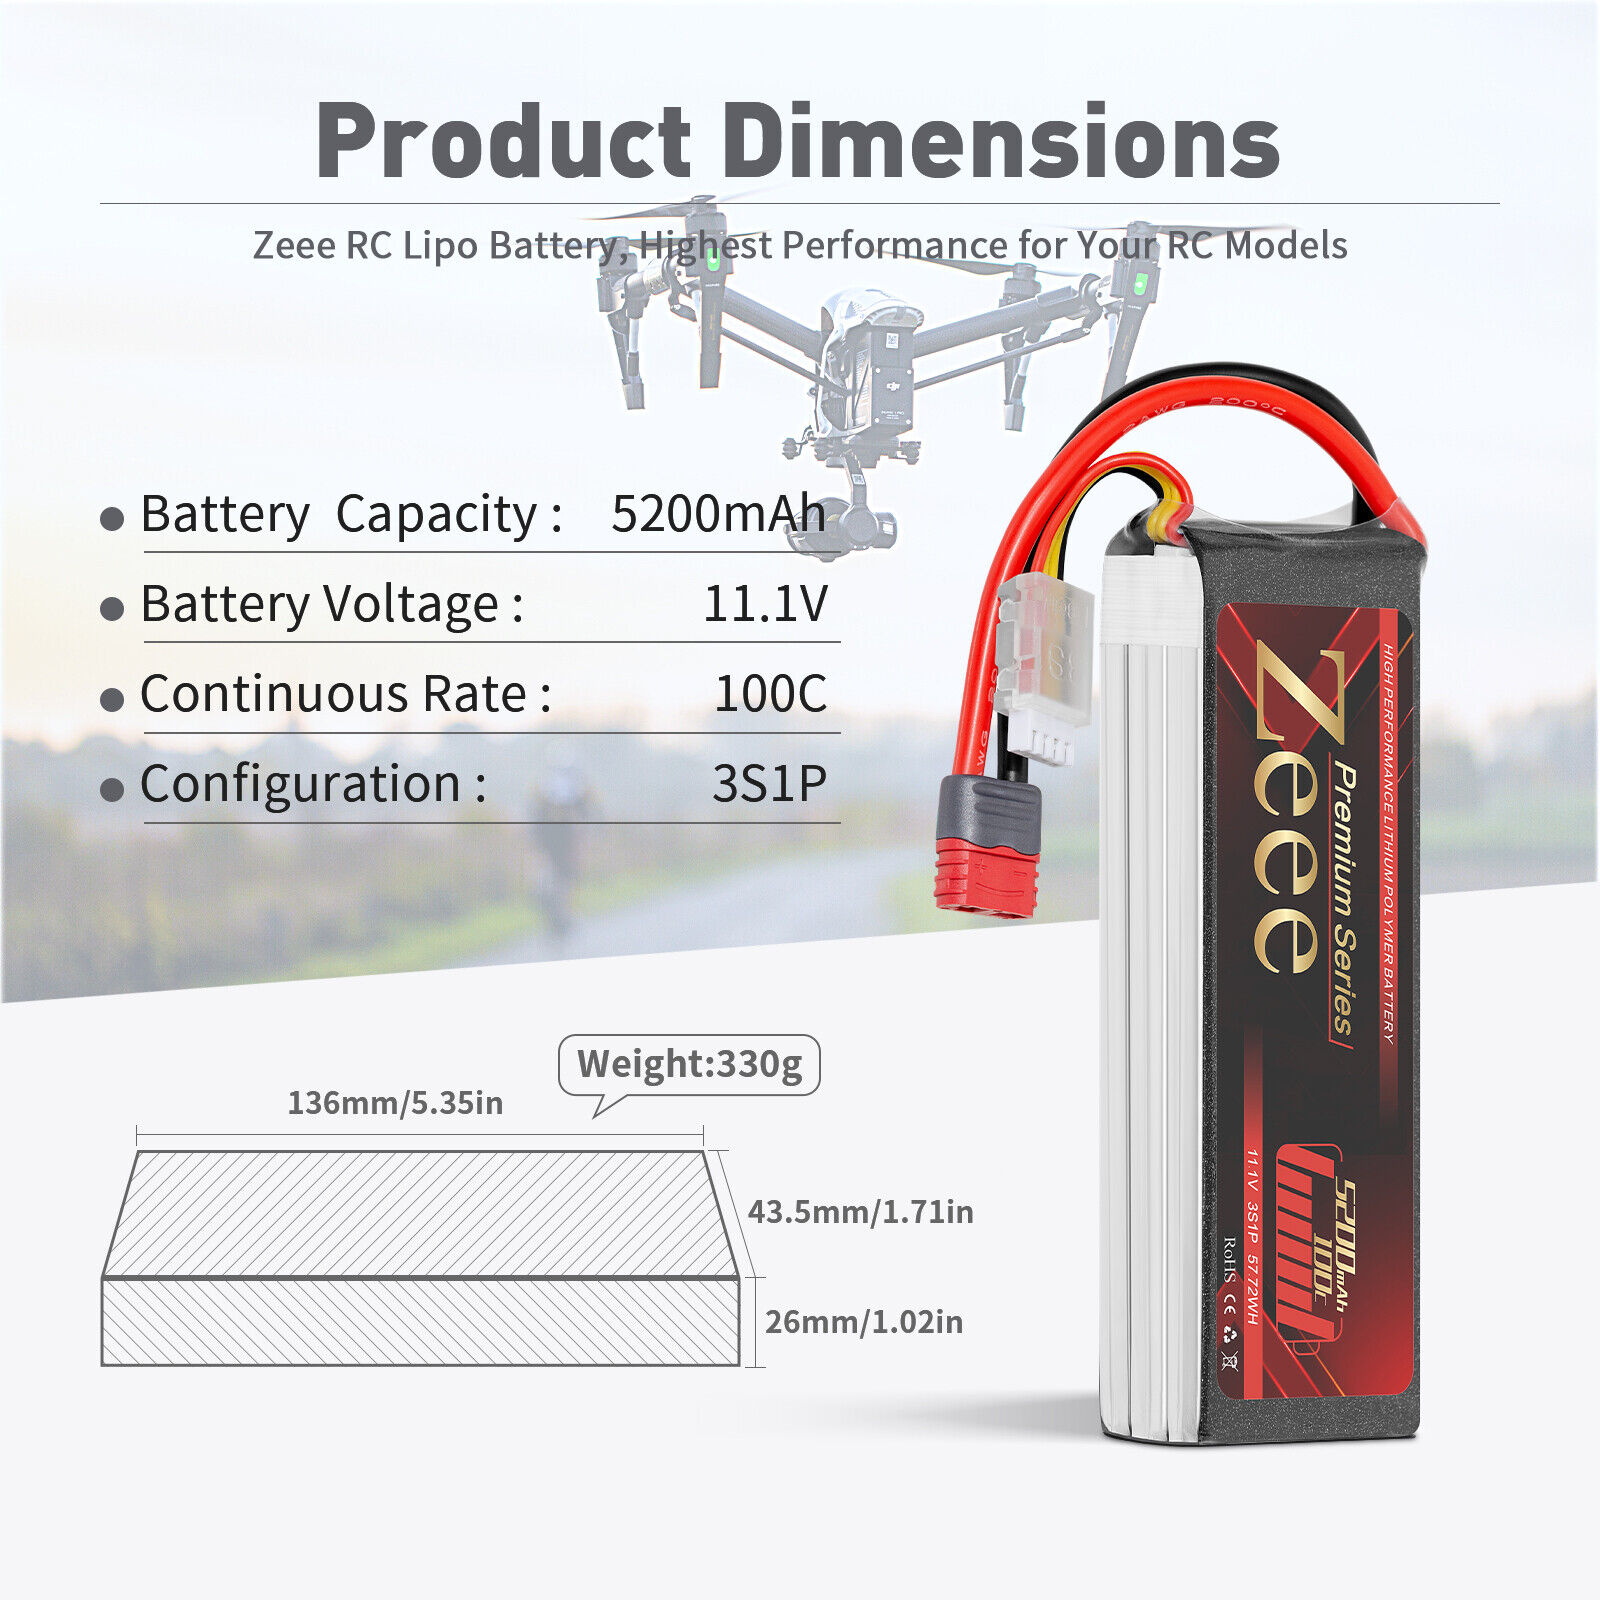 2x Zeee 3S LiPo Battery 11.1V 100C 5200mAh Deans for RC Car Helicopter Truck ZEEE Does Not Apply - фотография #3